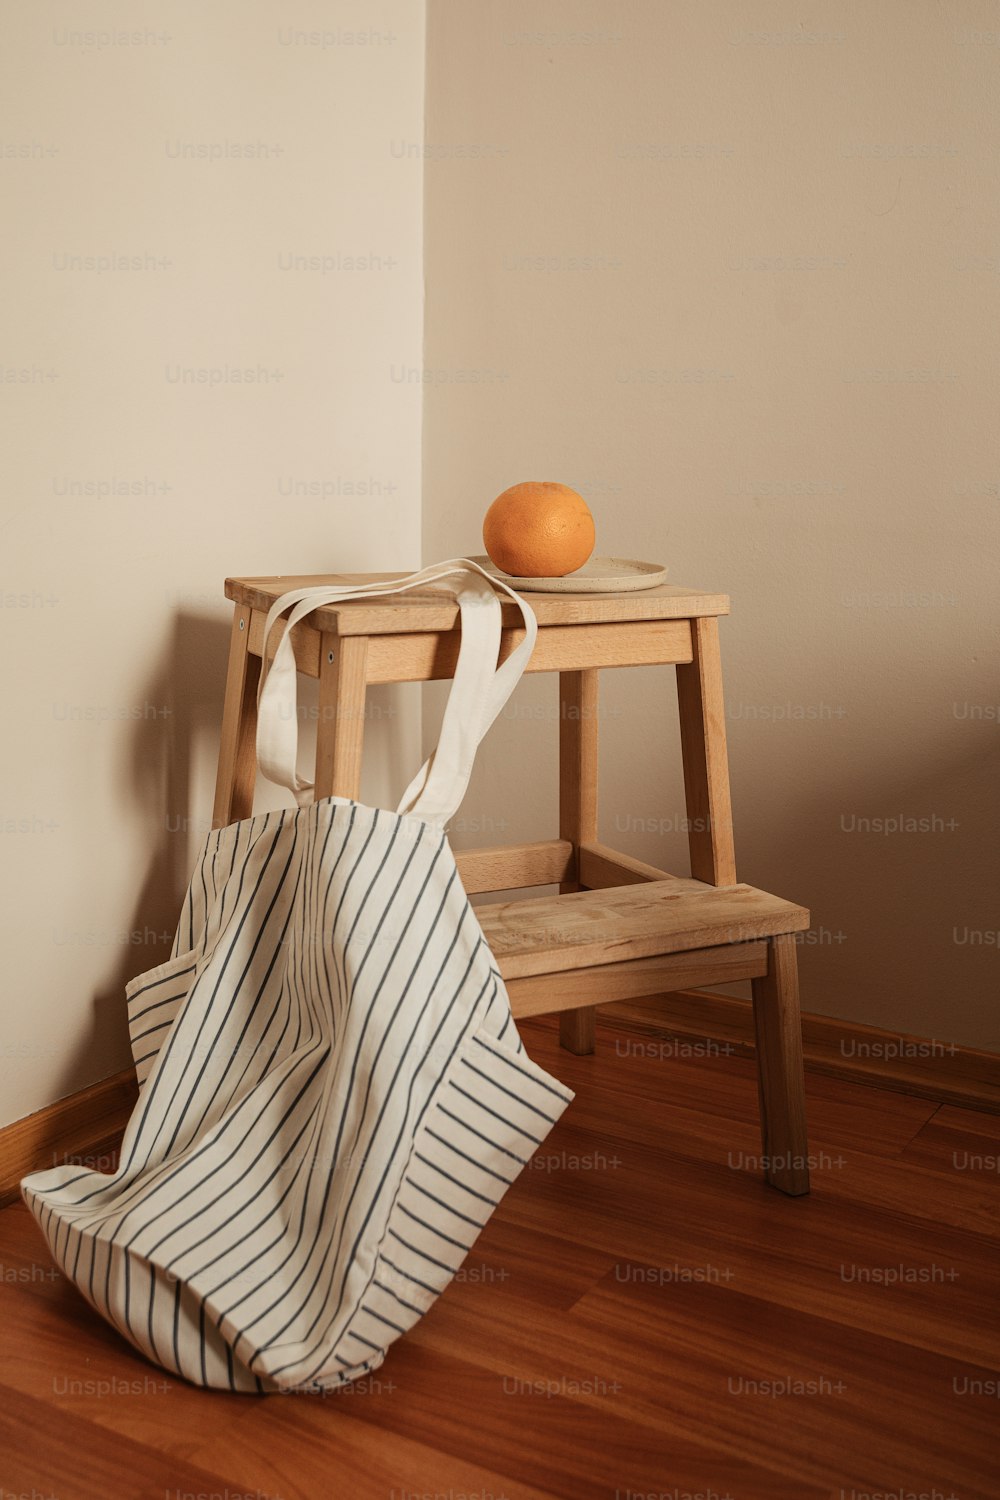 an orange sitting on top of a wooden stool